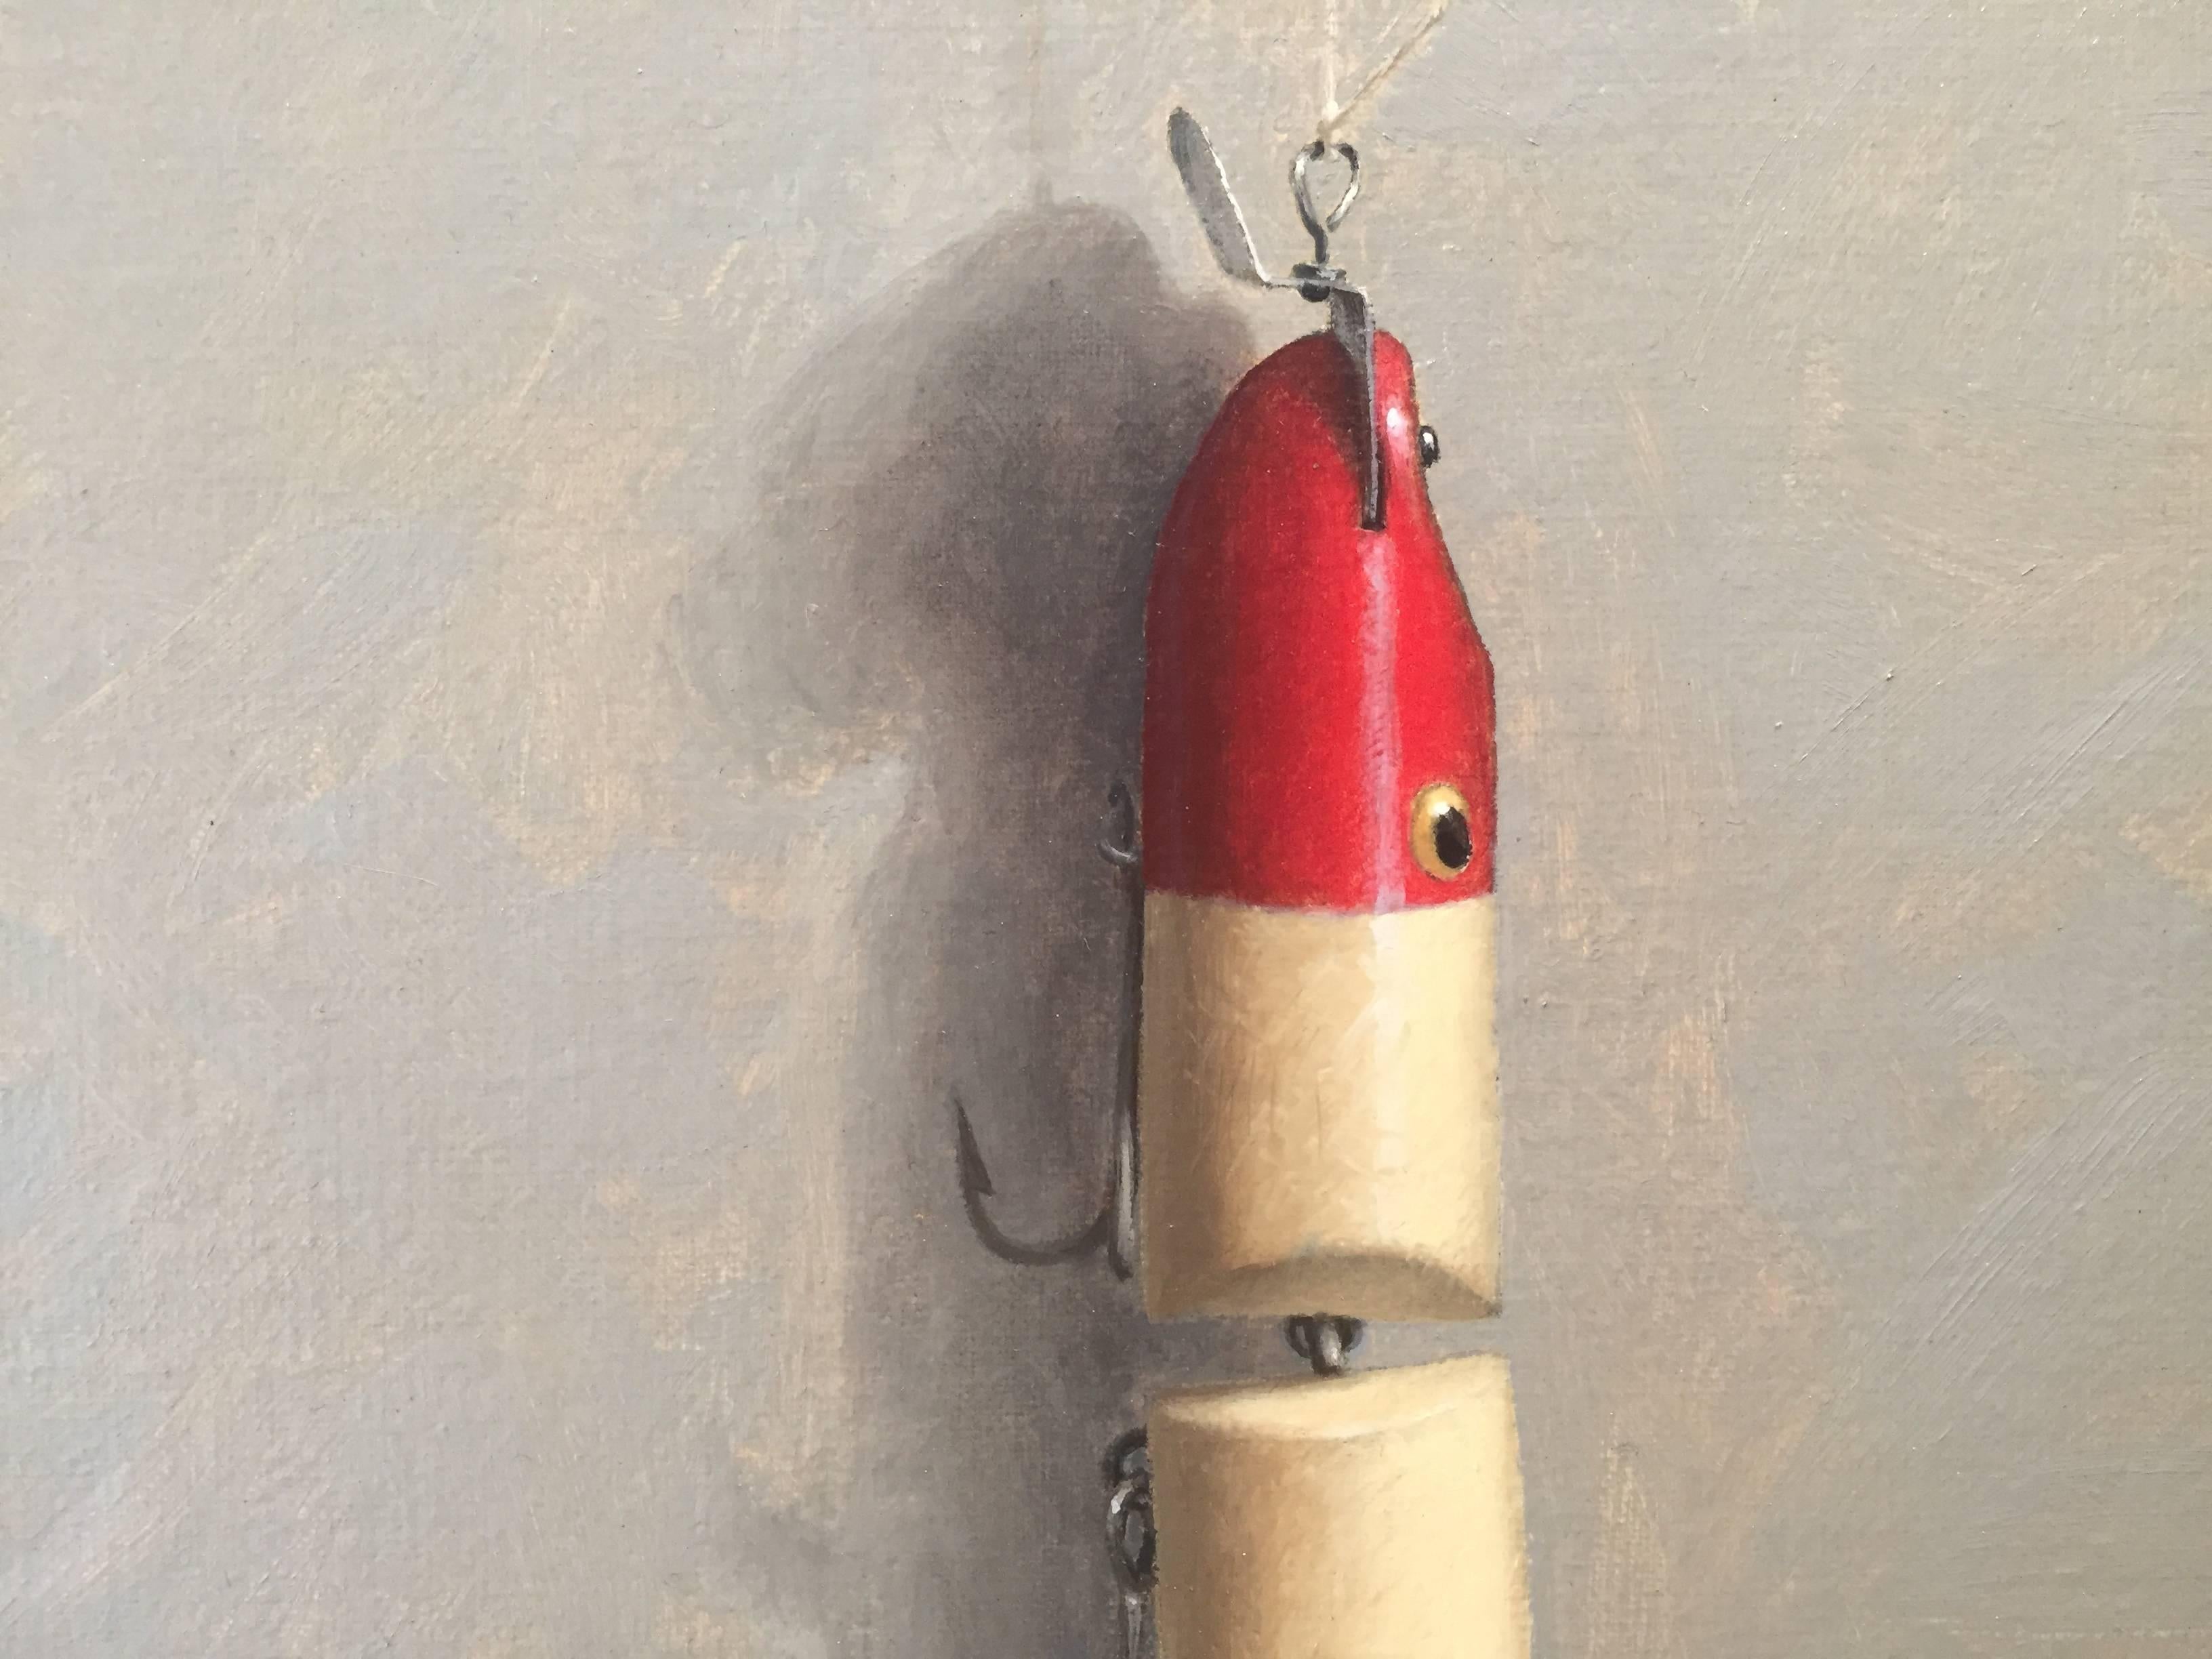 Painted from life in his Connecticut studio, a red and white 2-piece fishing lure hangs from a tiny metal nail. A thin white thread hooks the lure to the nail, 3 anchor-like hooks dangle from the lure, pointed sharp and glistening in rustic charm.